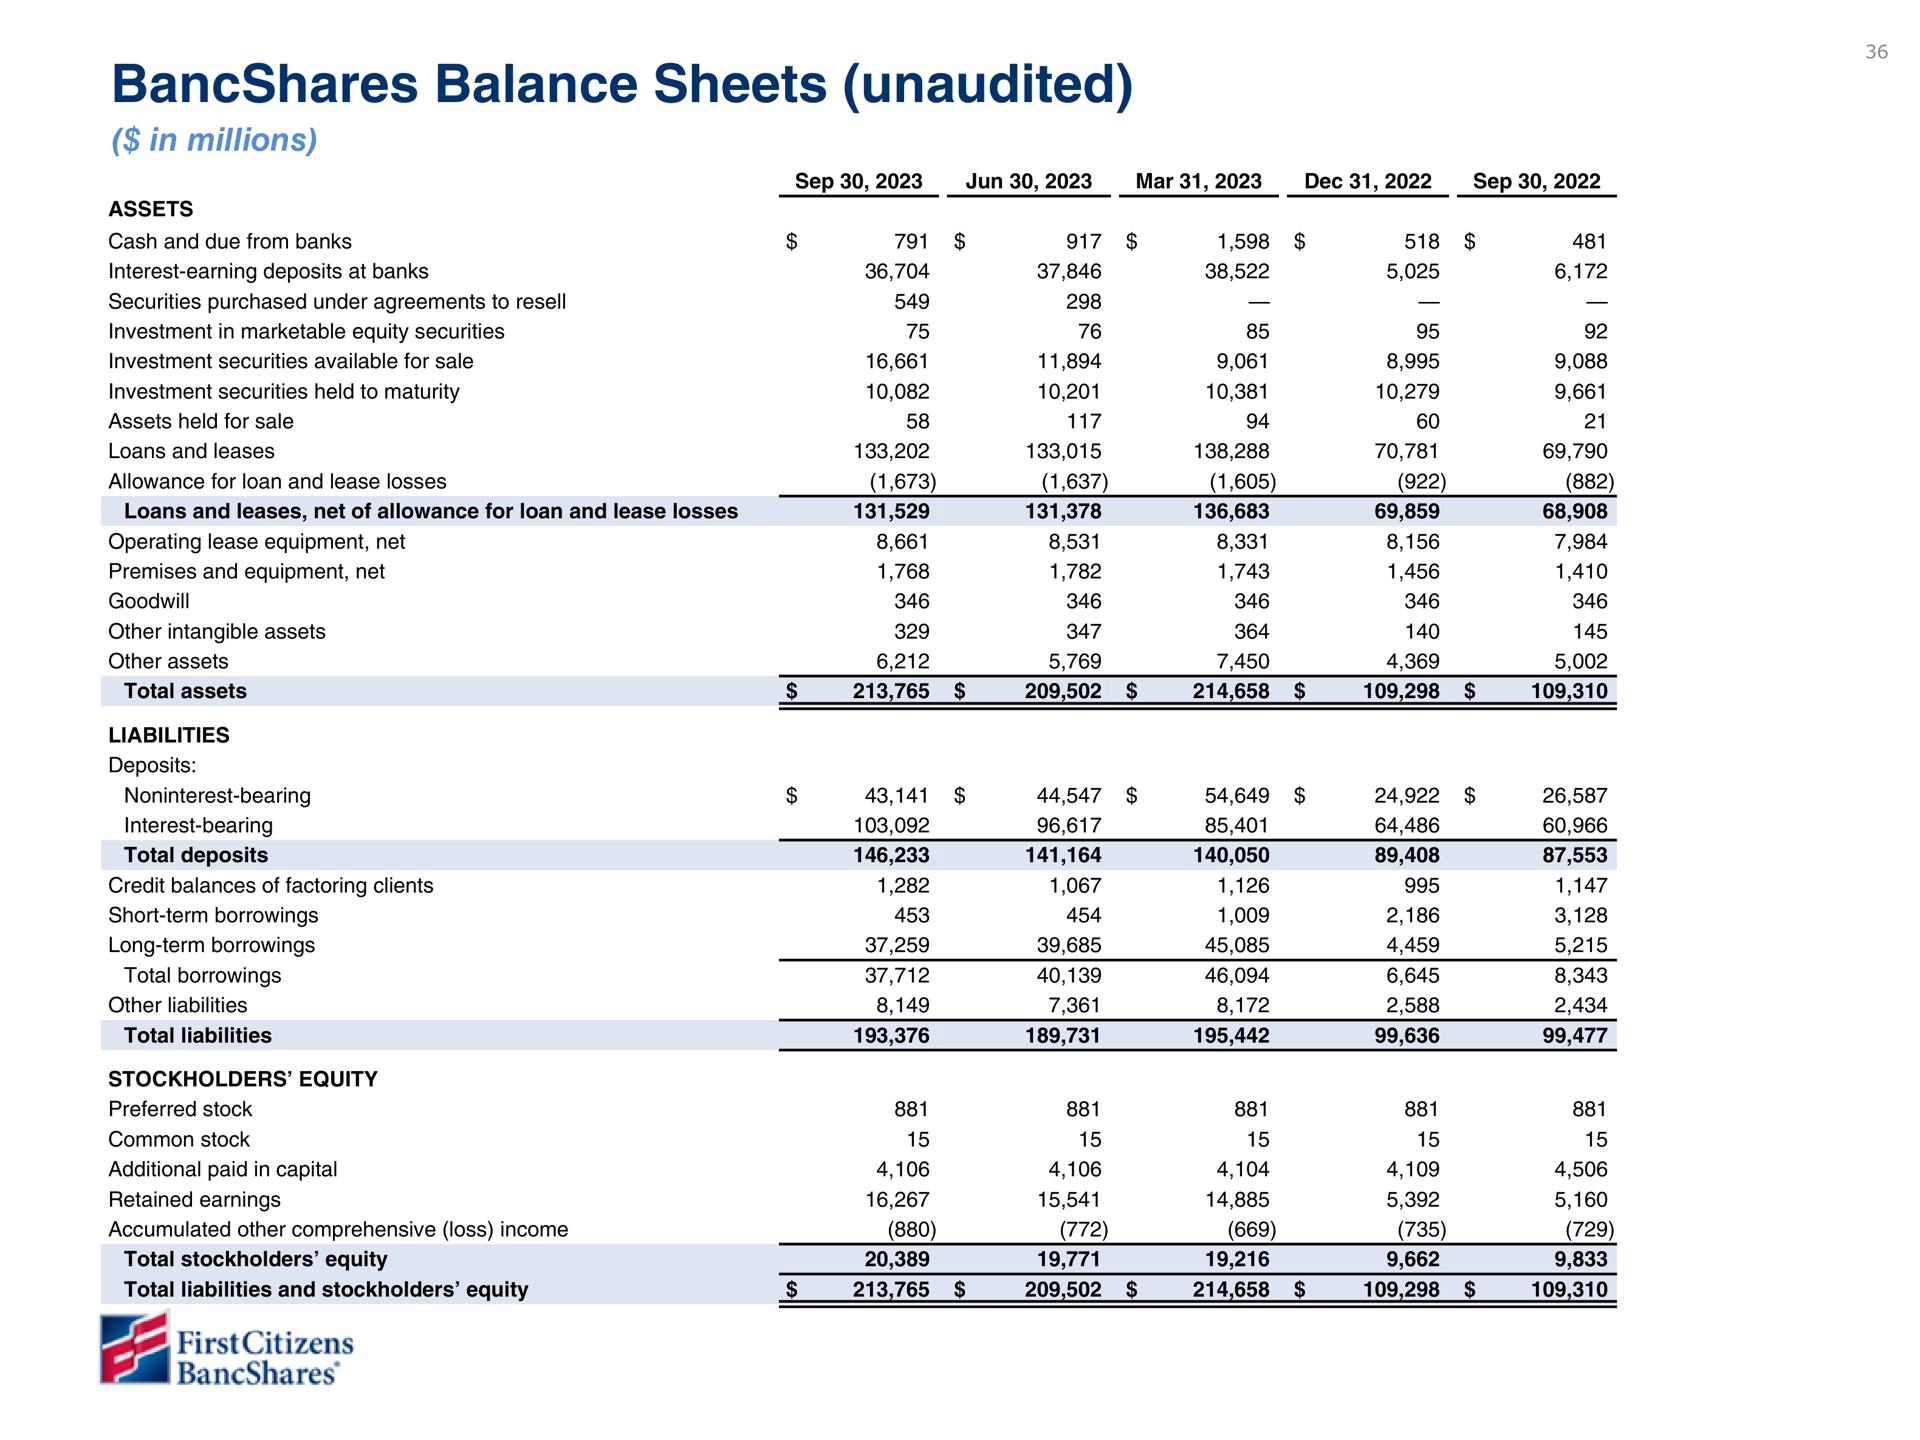 balance sheets unaudited am | First Citizens BancShares